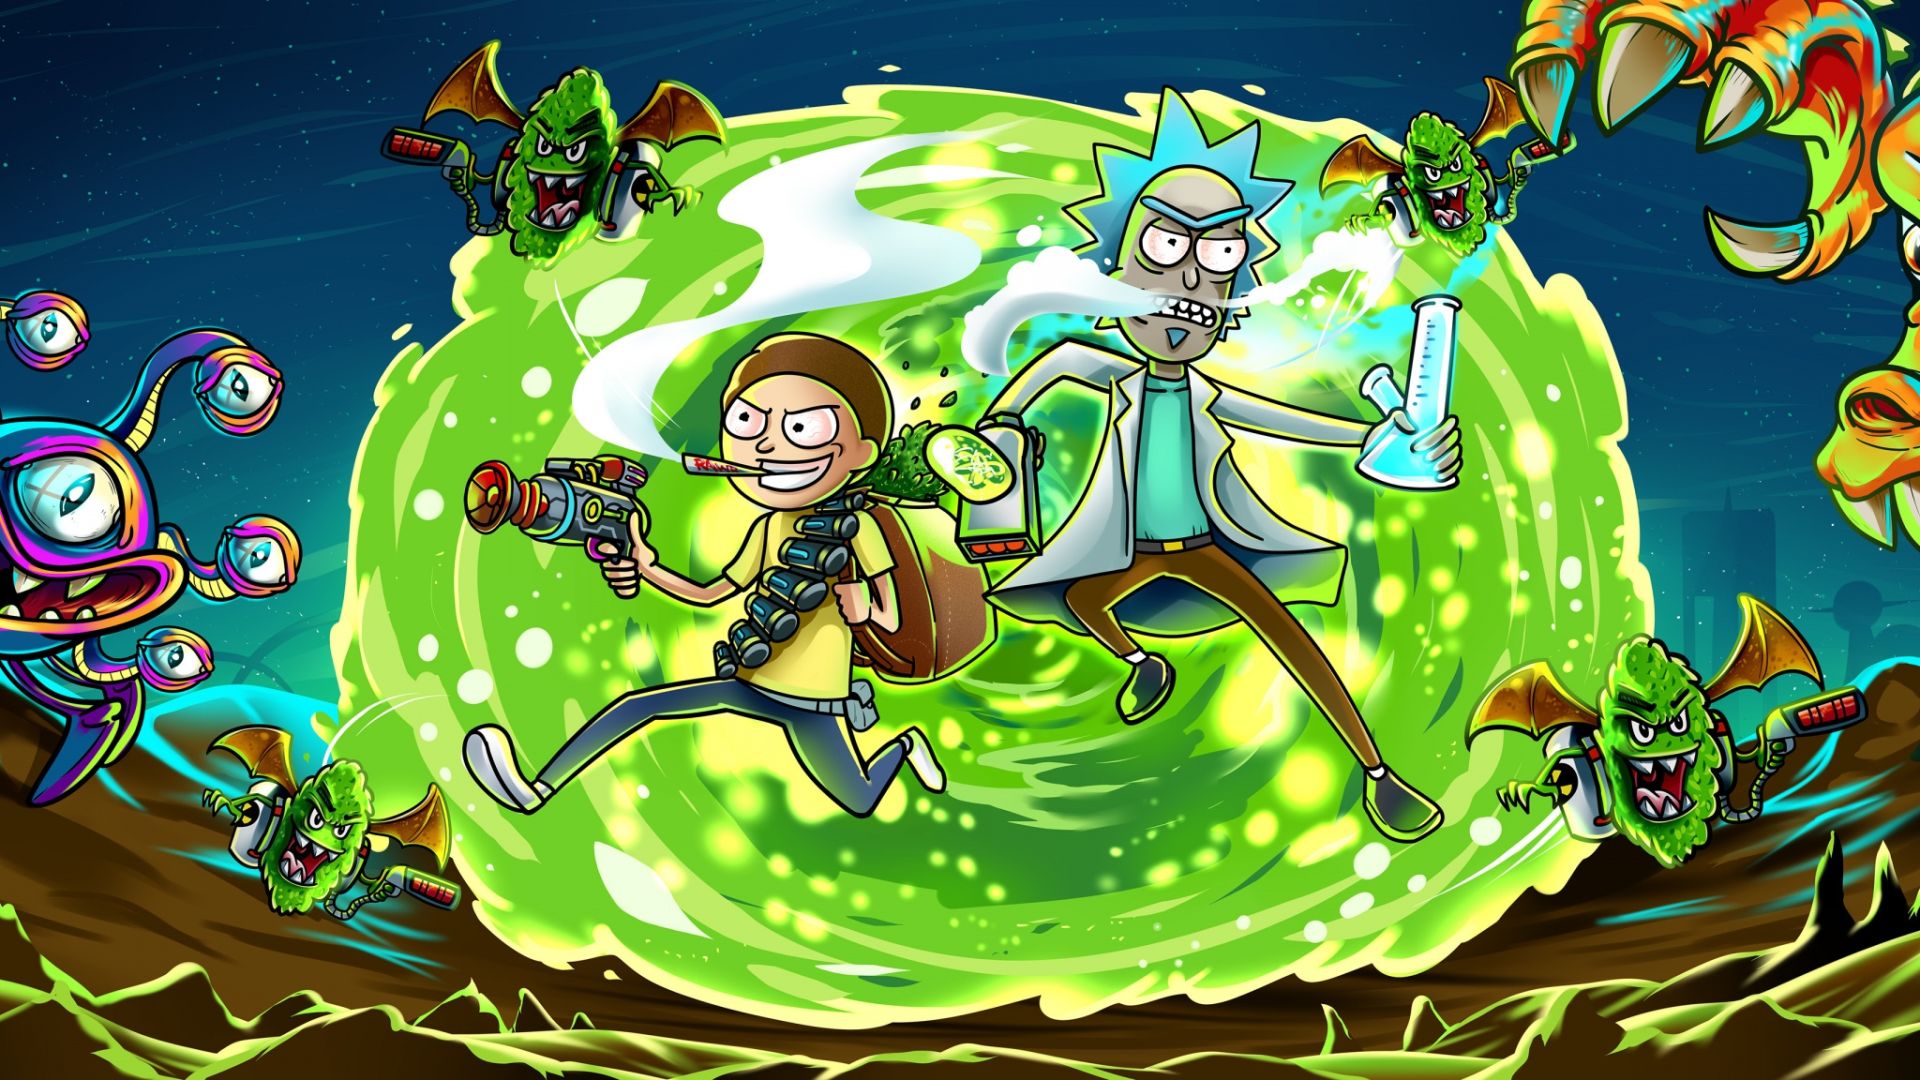 Rick and Morty Season 4 Episode 6 Release Date Speculations